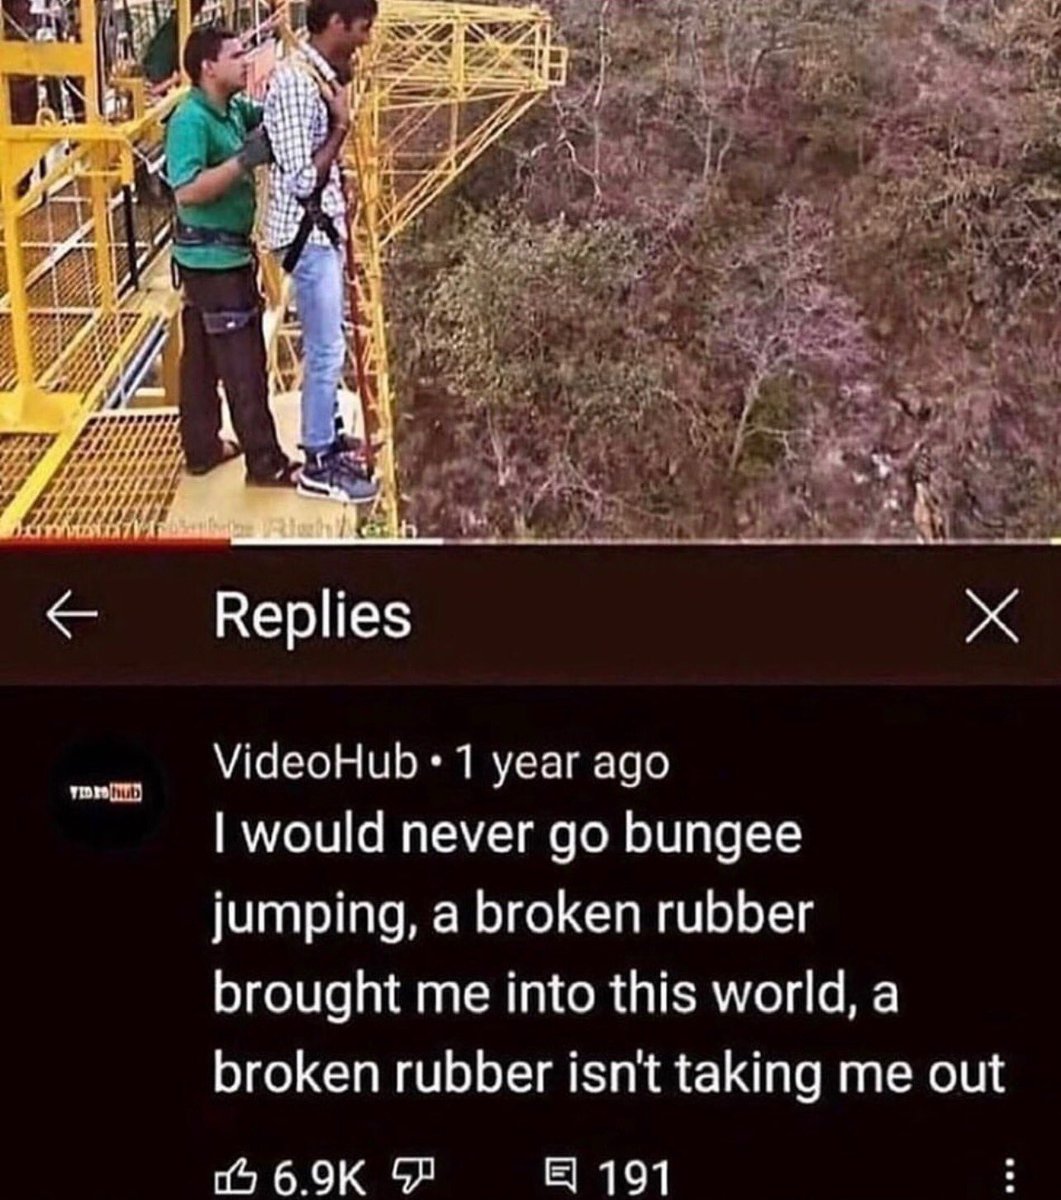 insane youtube comments - would never go bungee jumping - Video hub Caderne et ch Replies x VideoHub 1 year ago I would never go bungee jumping, a broken rubber brought me into this world, a broken rubber isn't taking me out 191